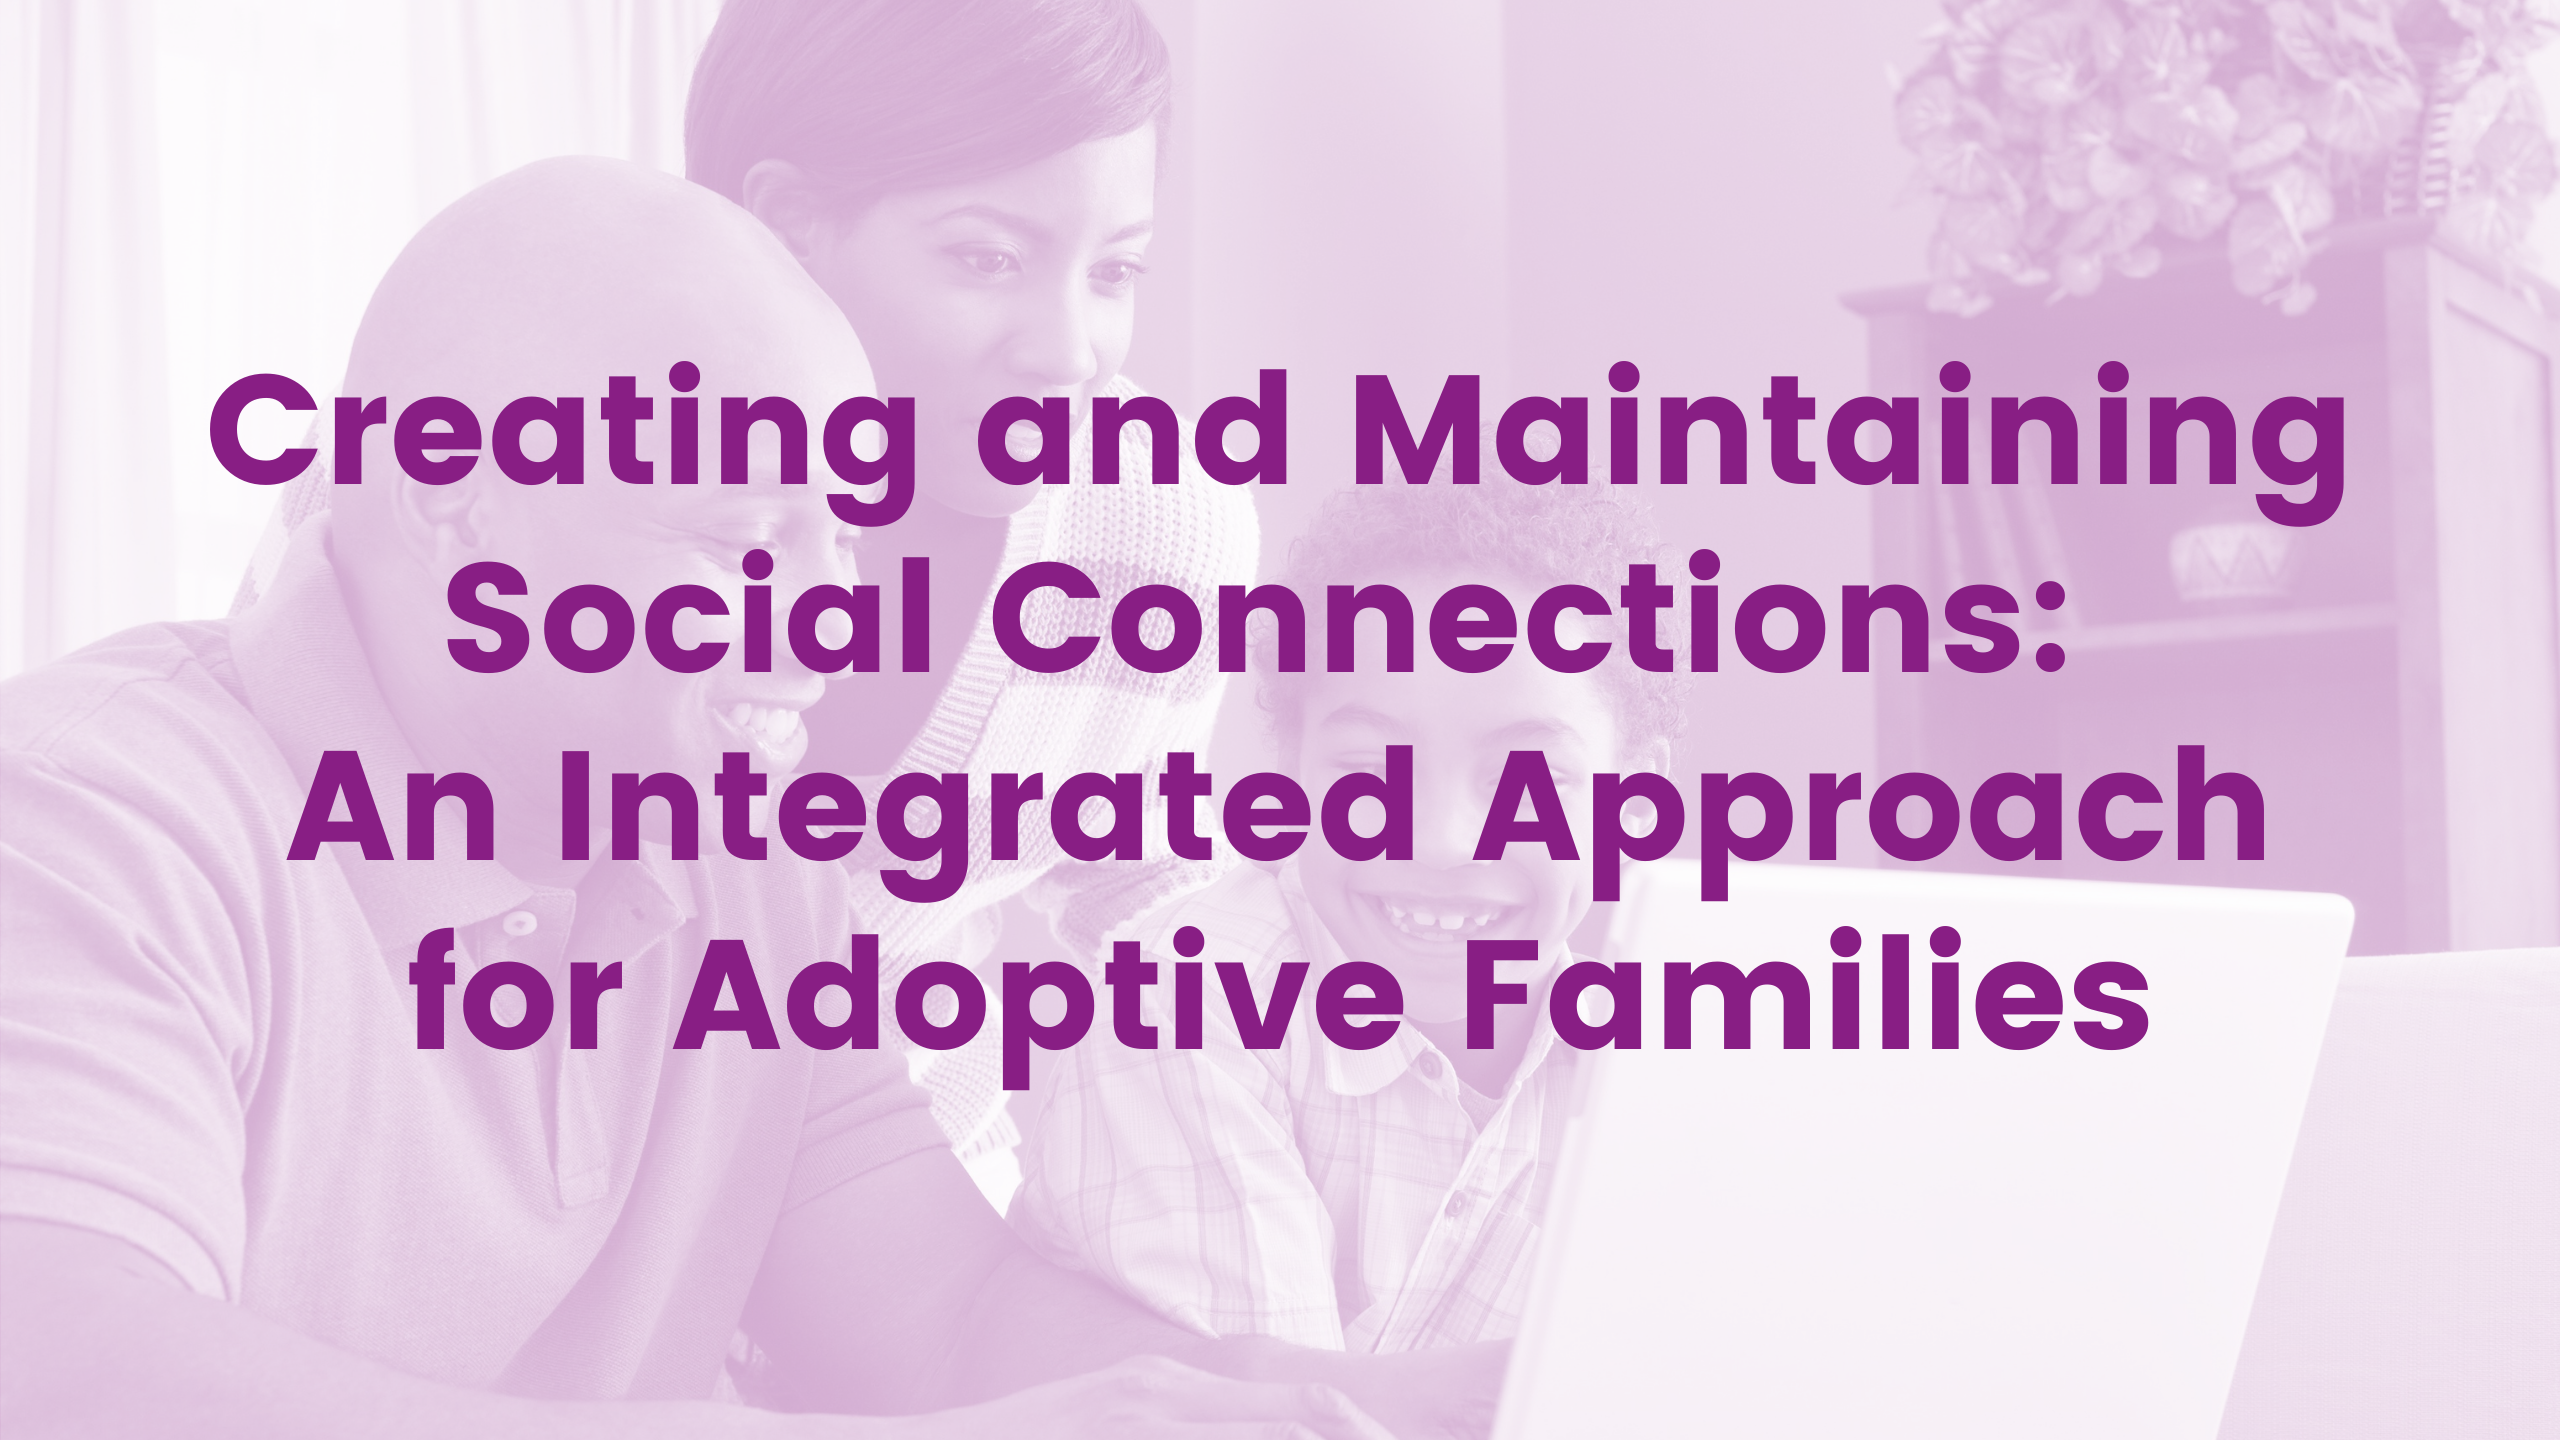 Creating and Maintaining Social Connections: An Integrated Approach for Adoptive Families Webinar